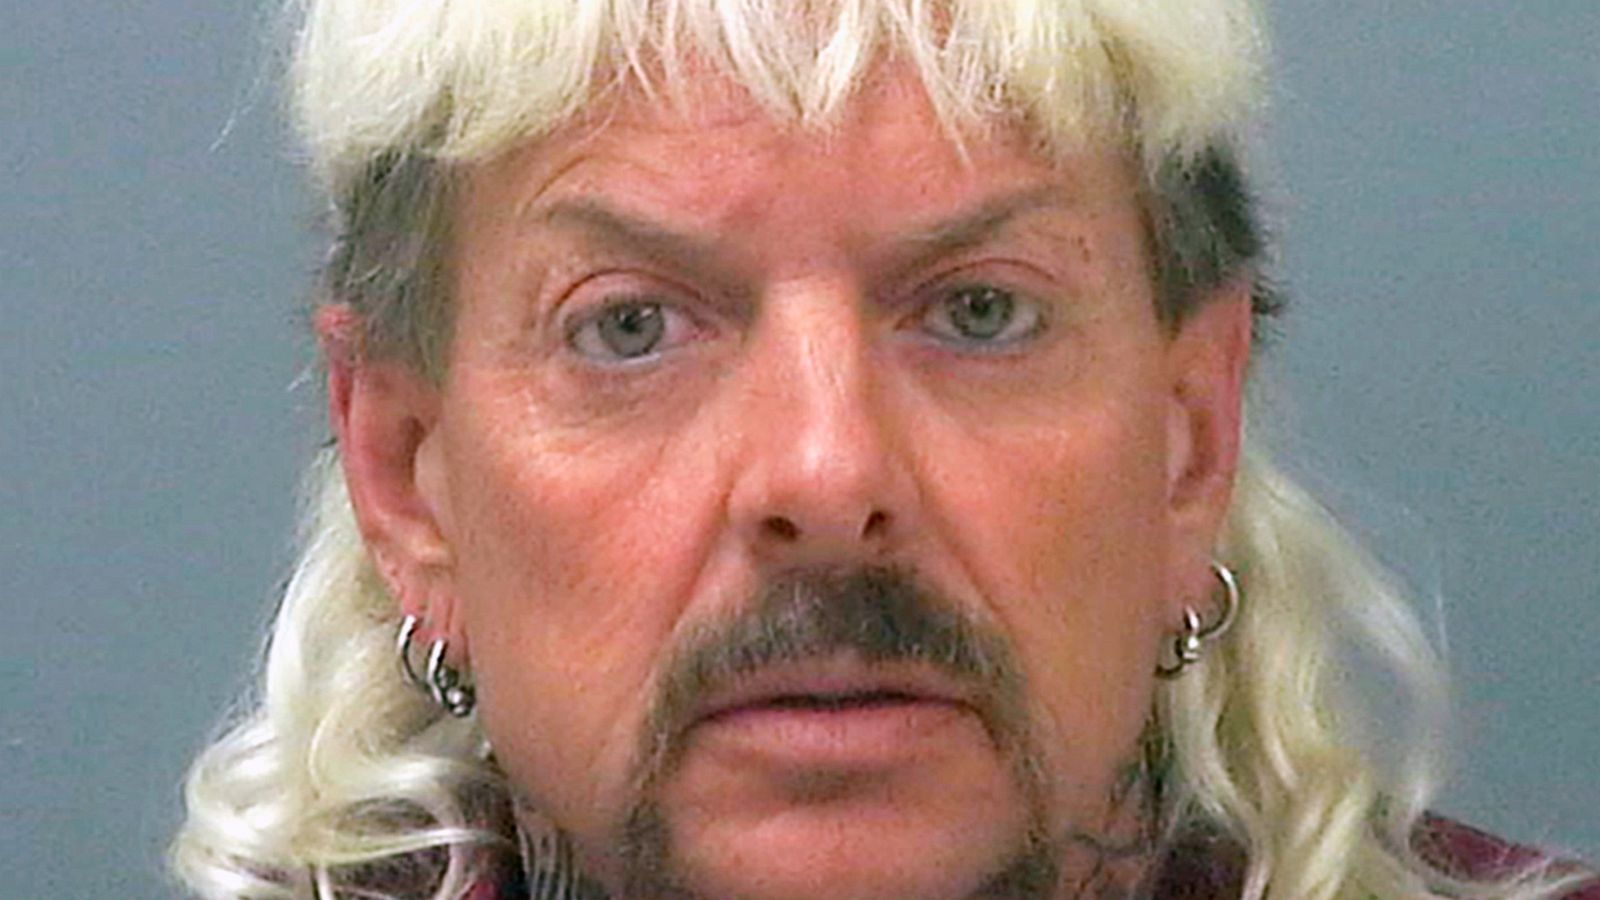 Attorneys say Joe Exotic of 'Tiger King' wants new trial - ABC News